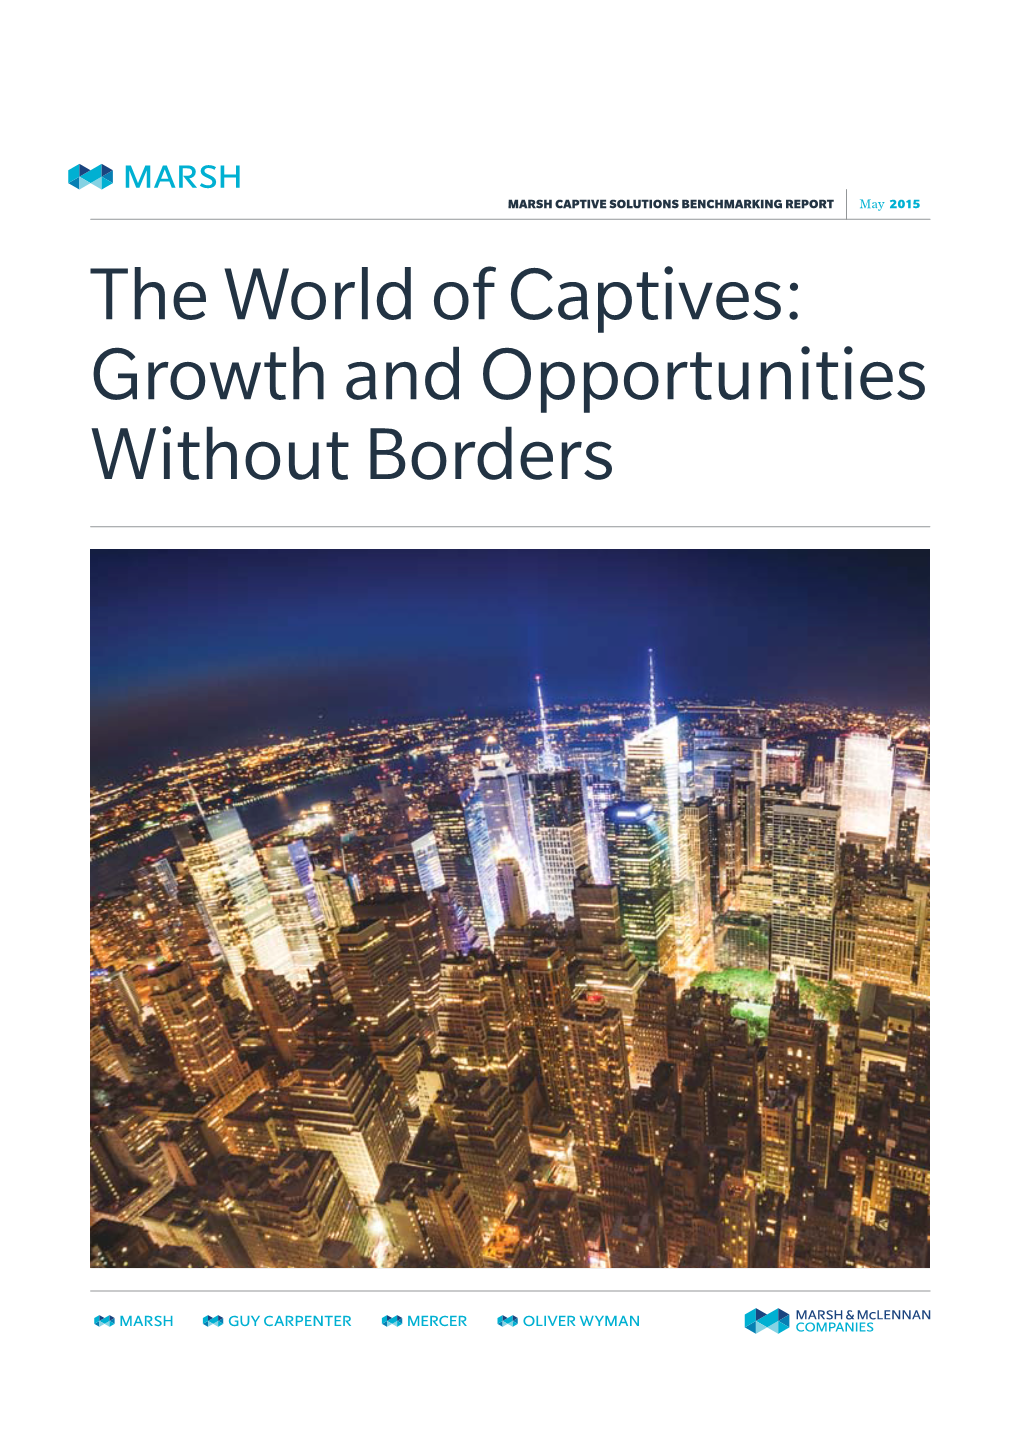 The World of Captives: Growth and Opportunities Without Borders MARSH CAPTIVE SOLUTIONS BENCHMARKING REPORT May 2015